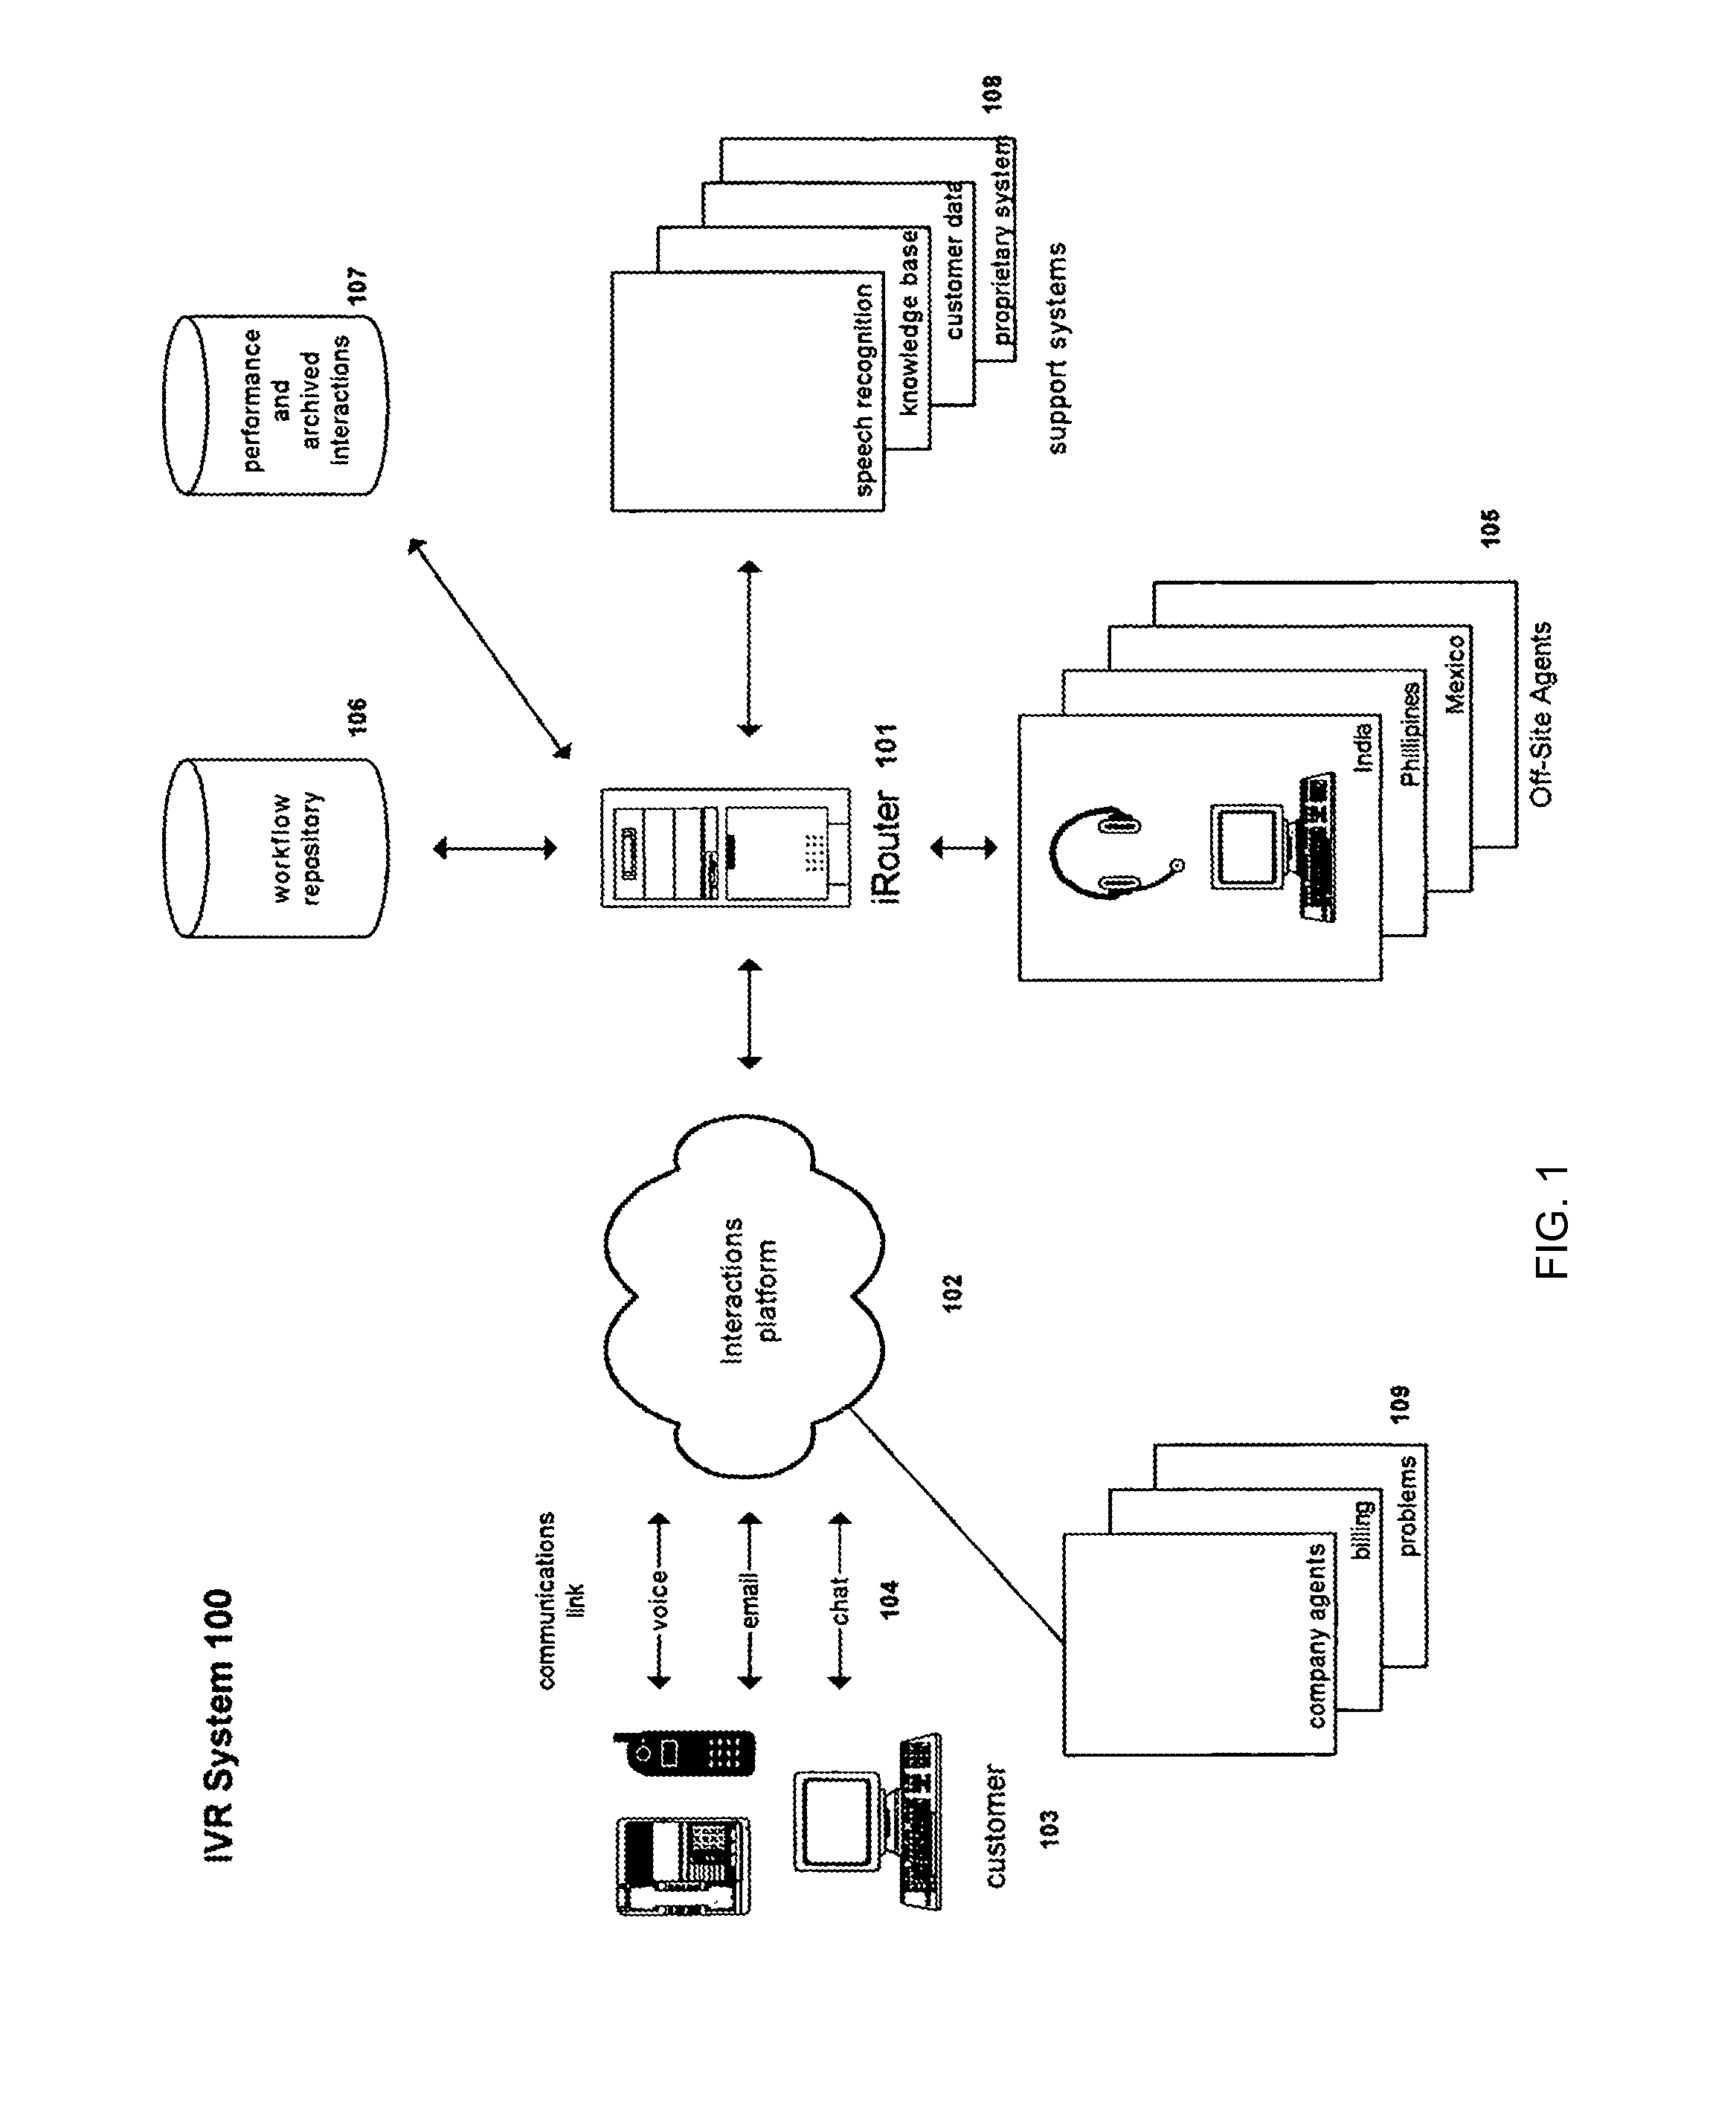 Automated speech recognition proxy system for natural language understanding